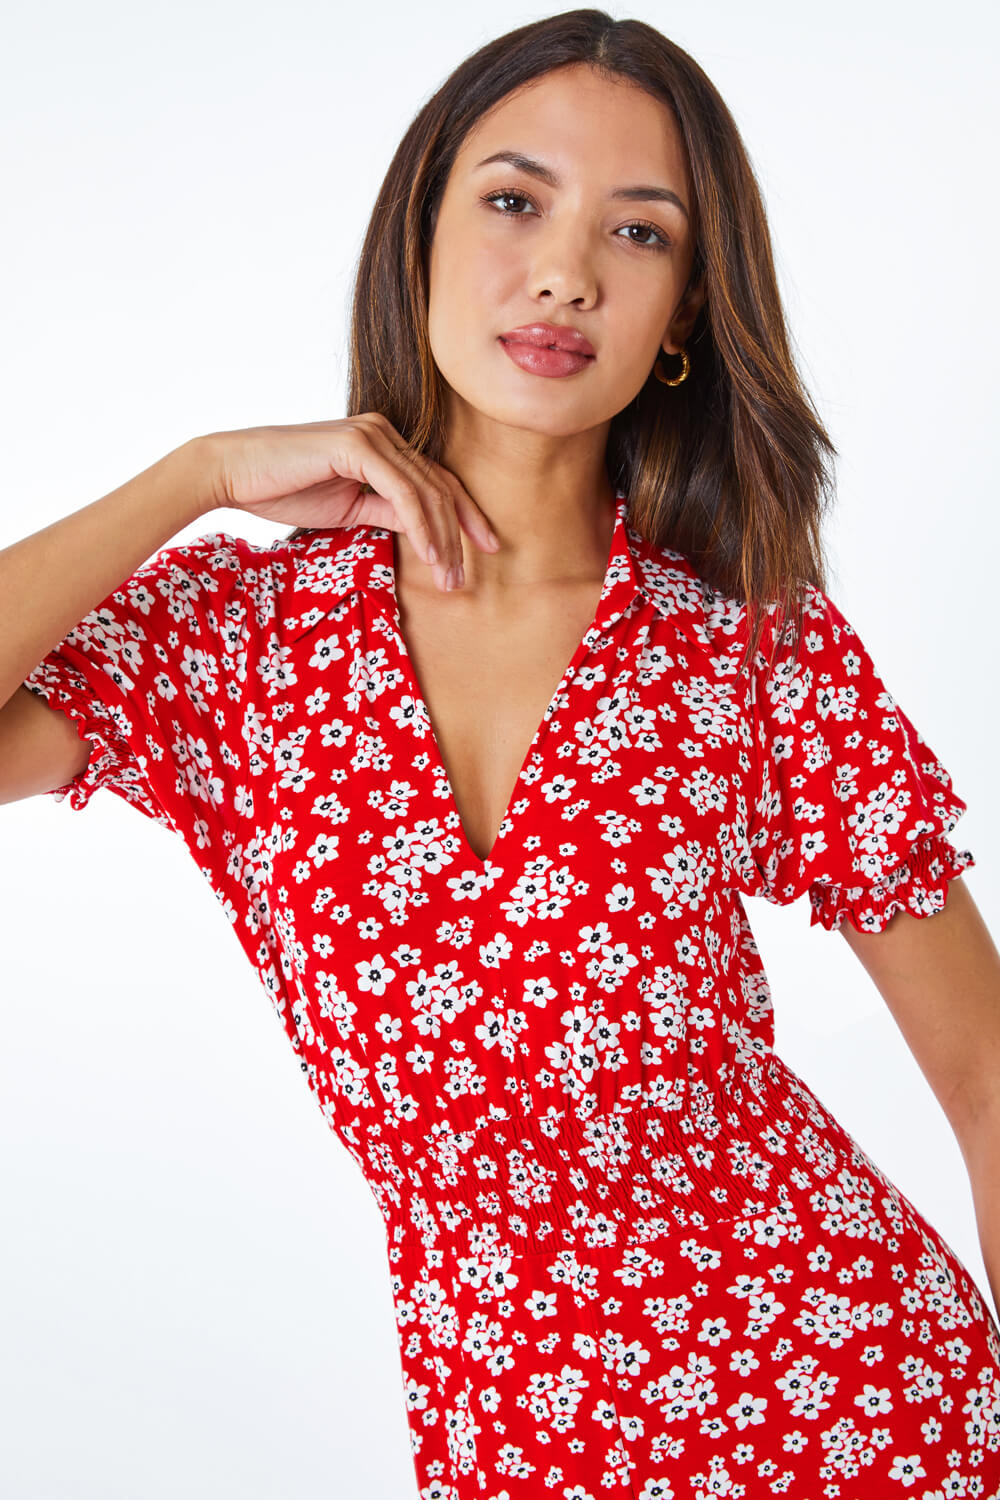 Ditsy Floral Print Fit & Flare Dress in Red - Roman Originals UK